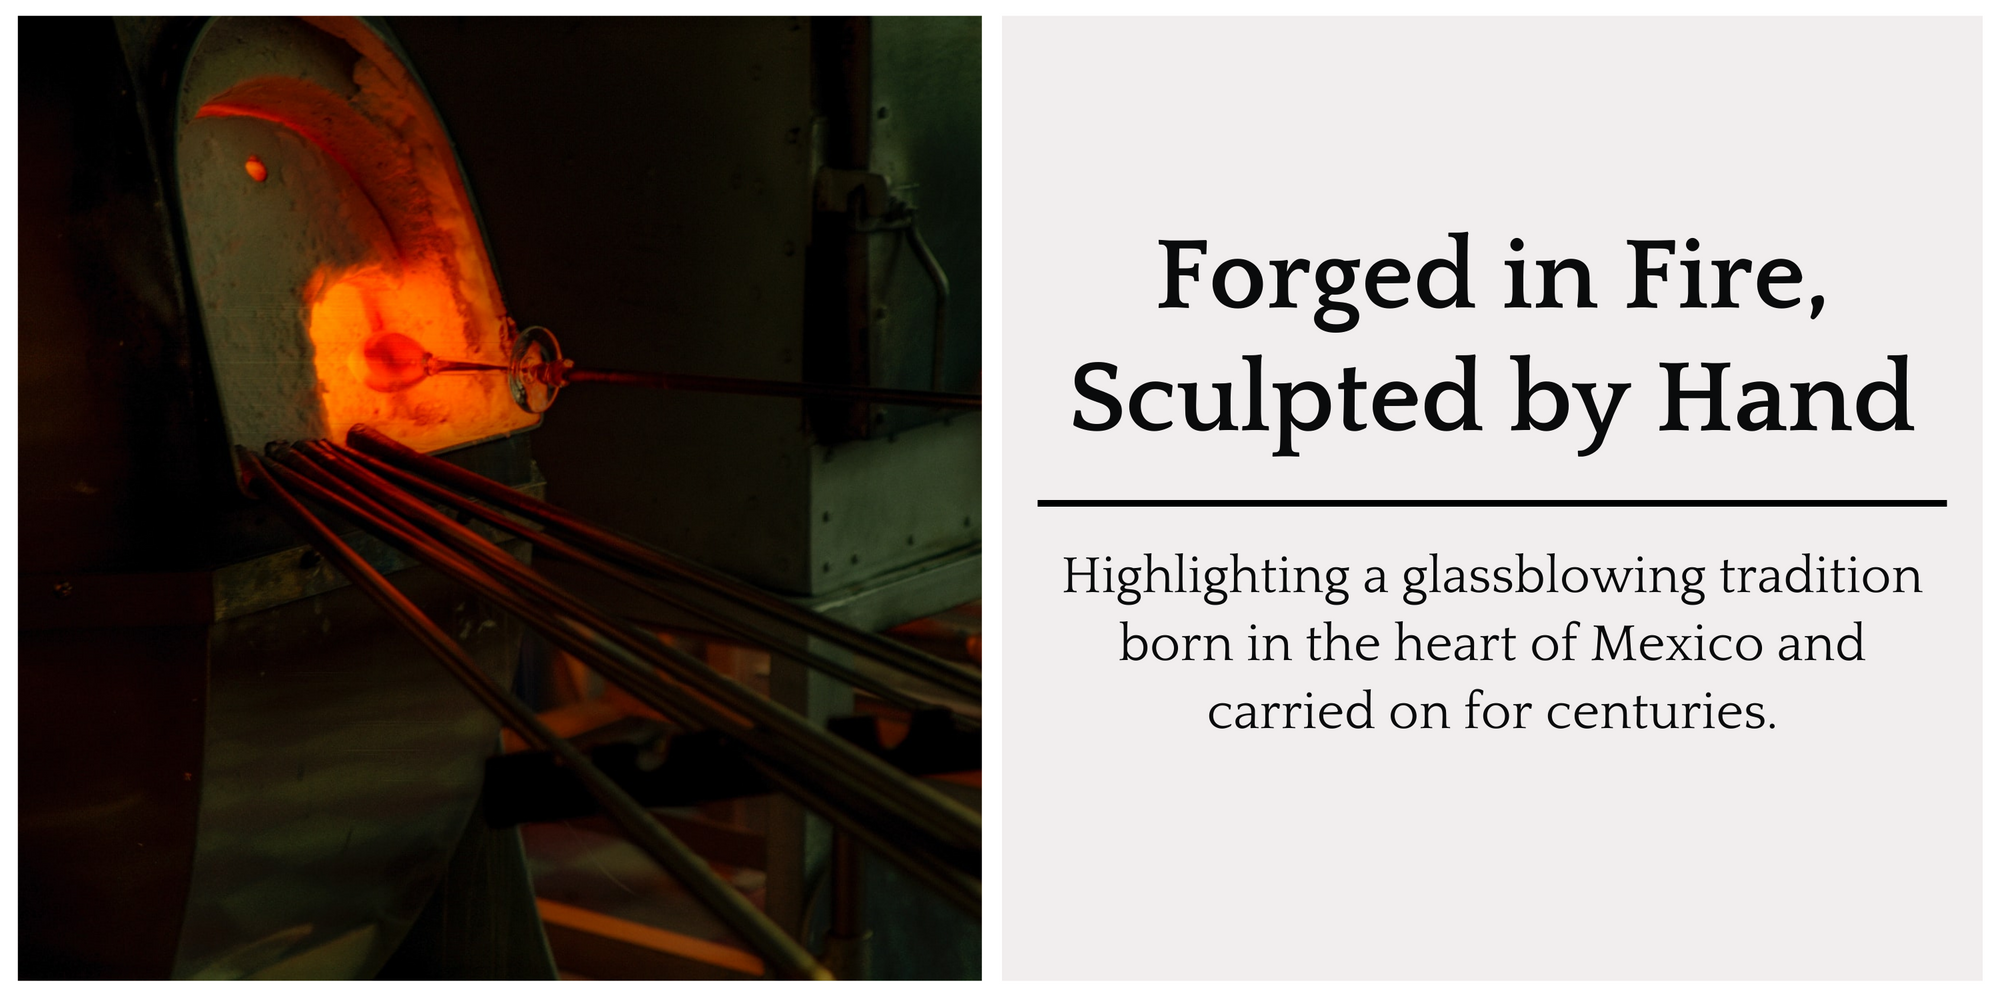 The History and Technique of Artisanal Mexican Glassblowers